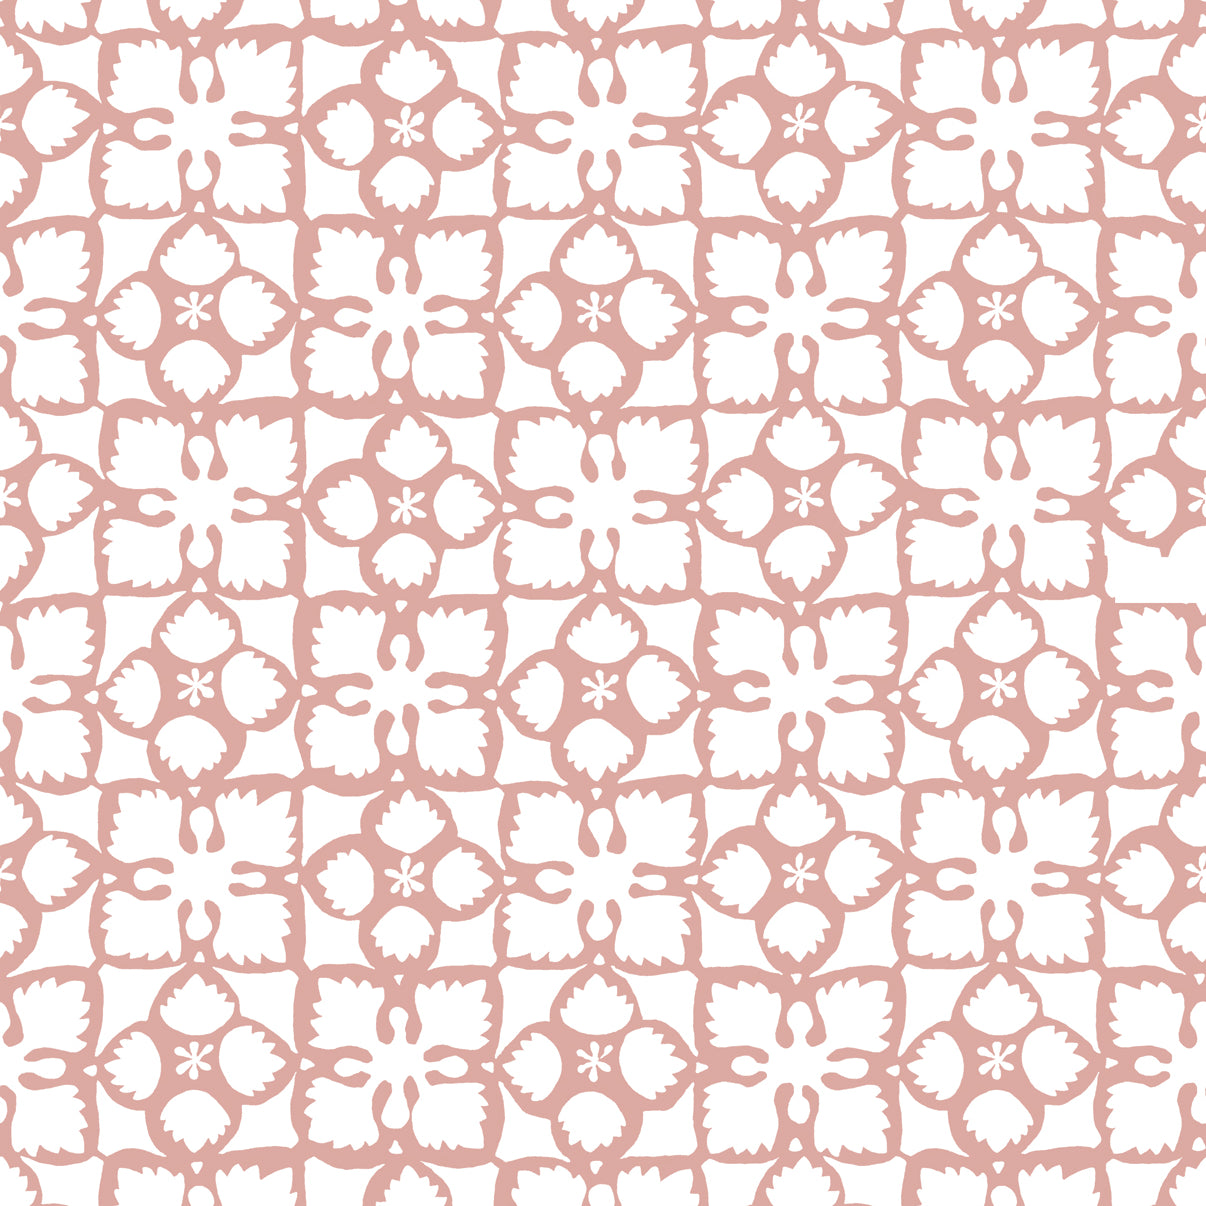 Detail of wallpaper in a botanical lattice print in light pink on a white field.